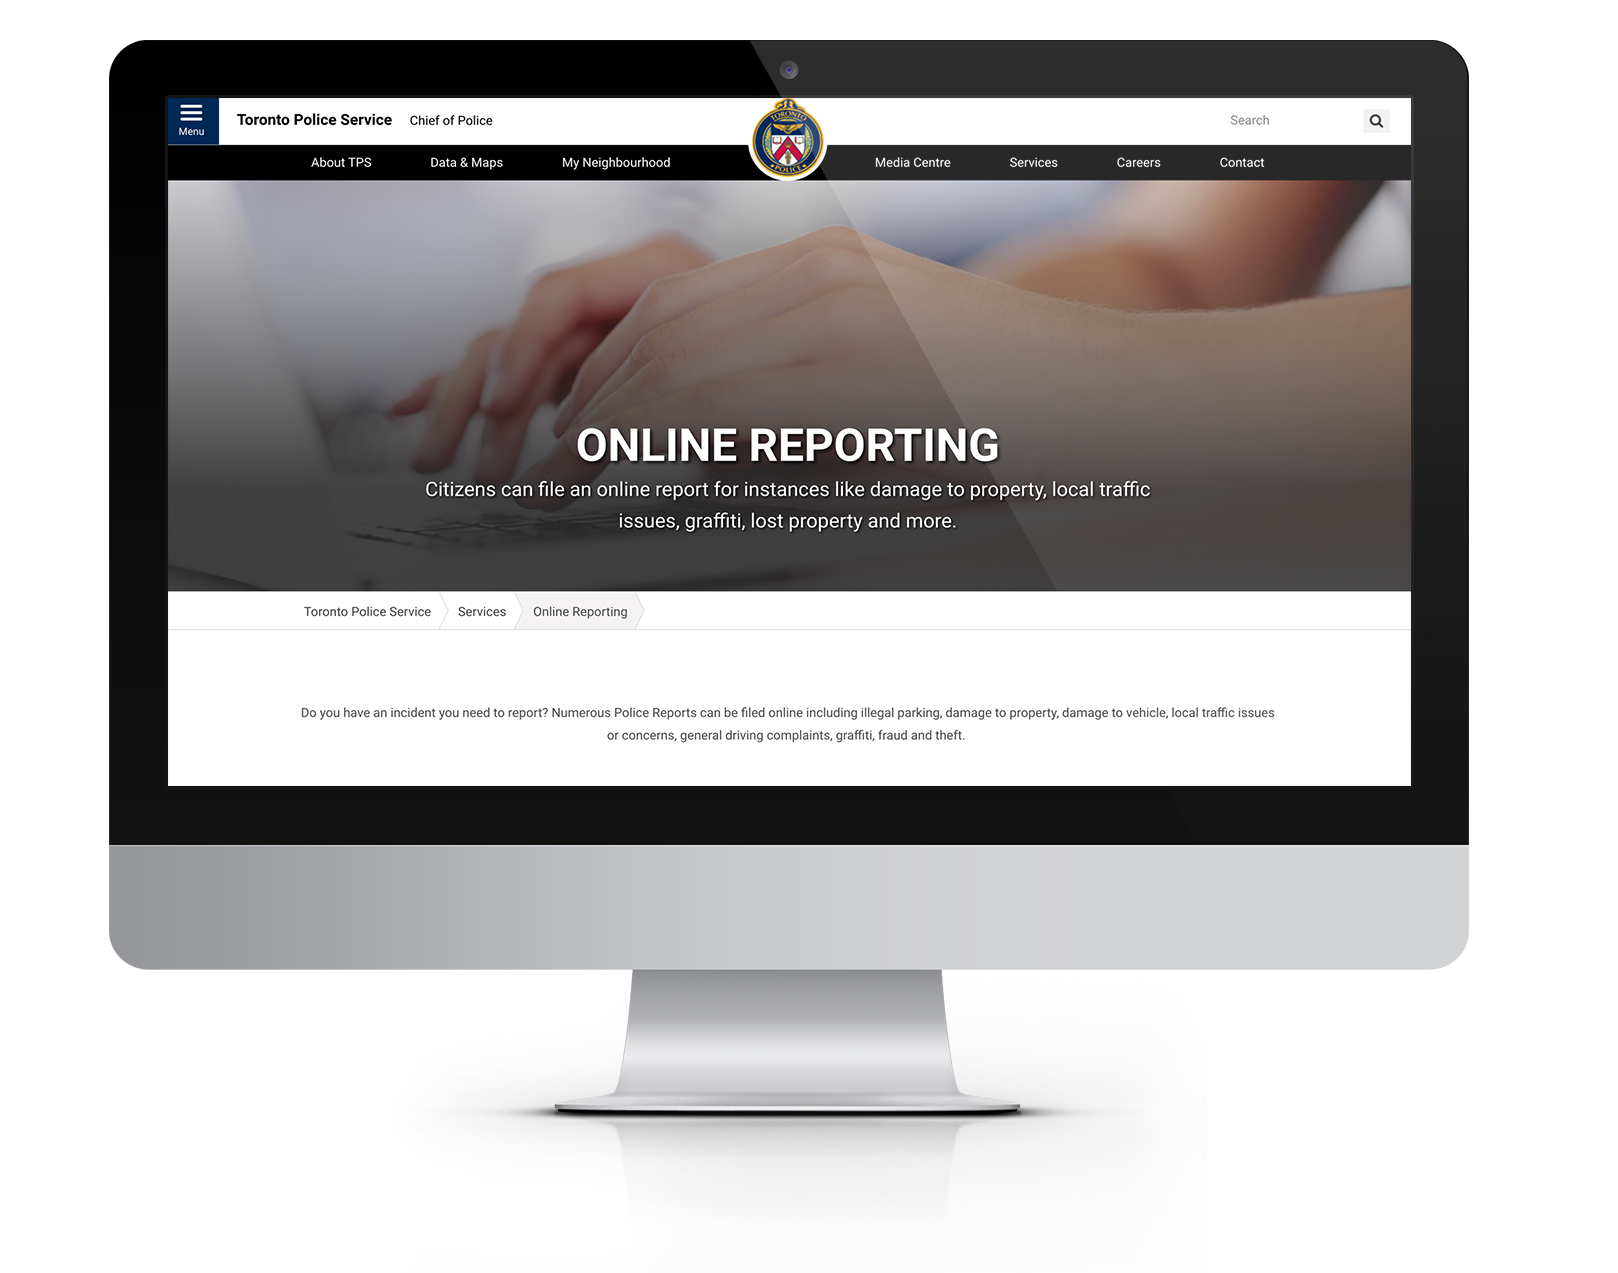 Image of TPS online reporting website